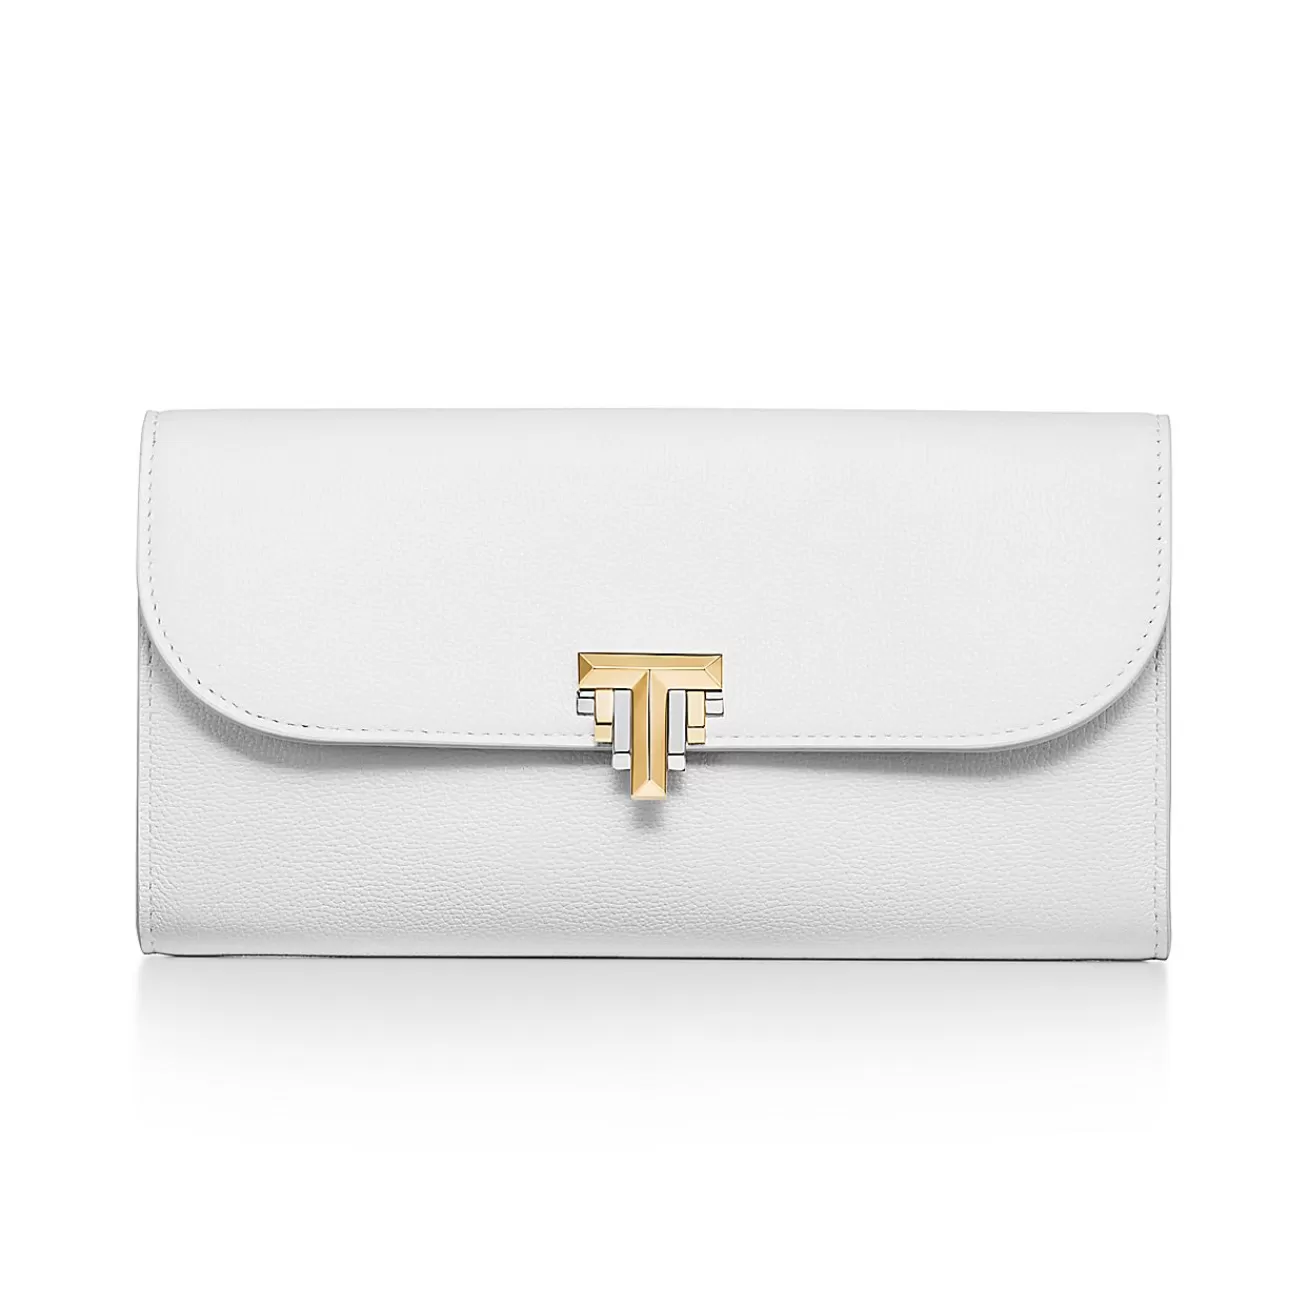 Tiffany & Co. Tiffany T Deco Continental Wallet in White Leather | ^Women Small Leather Goods | Women's Accessories